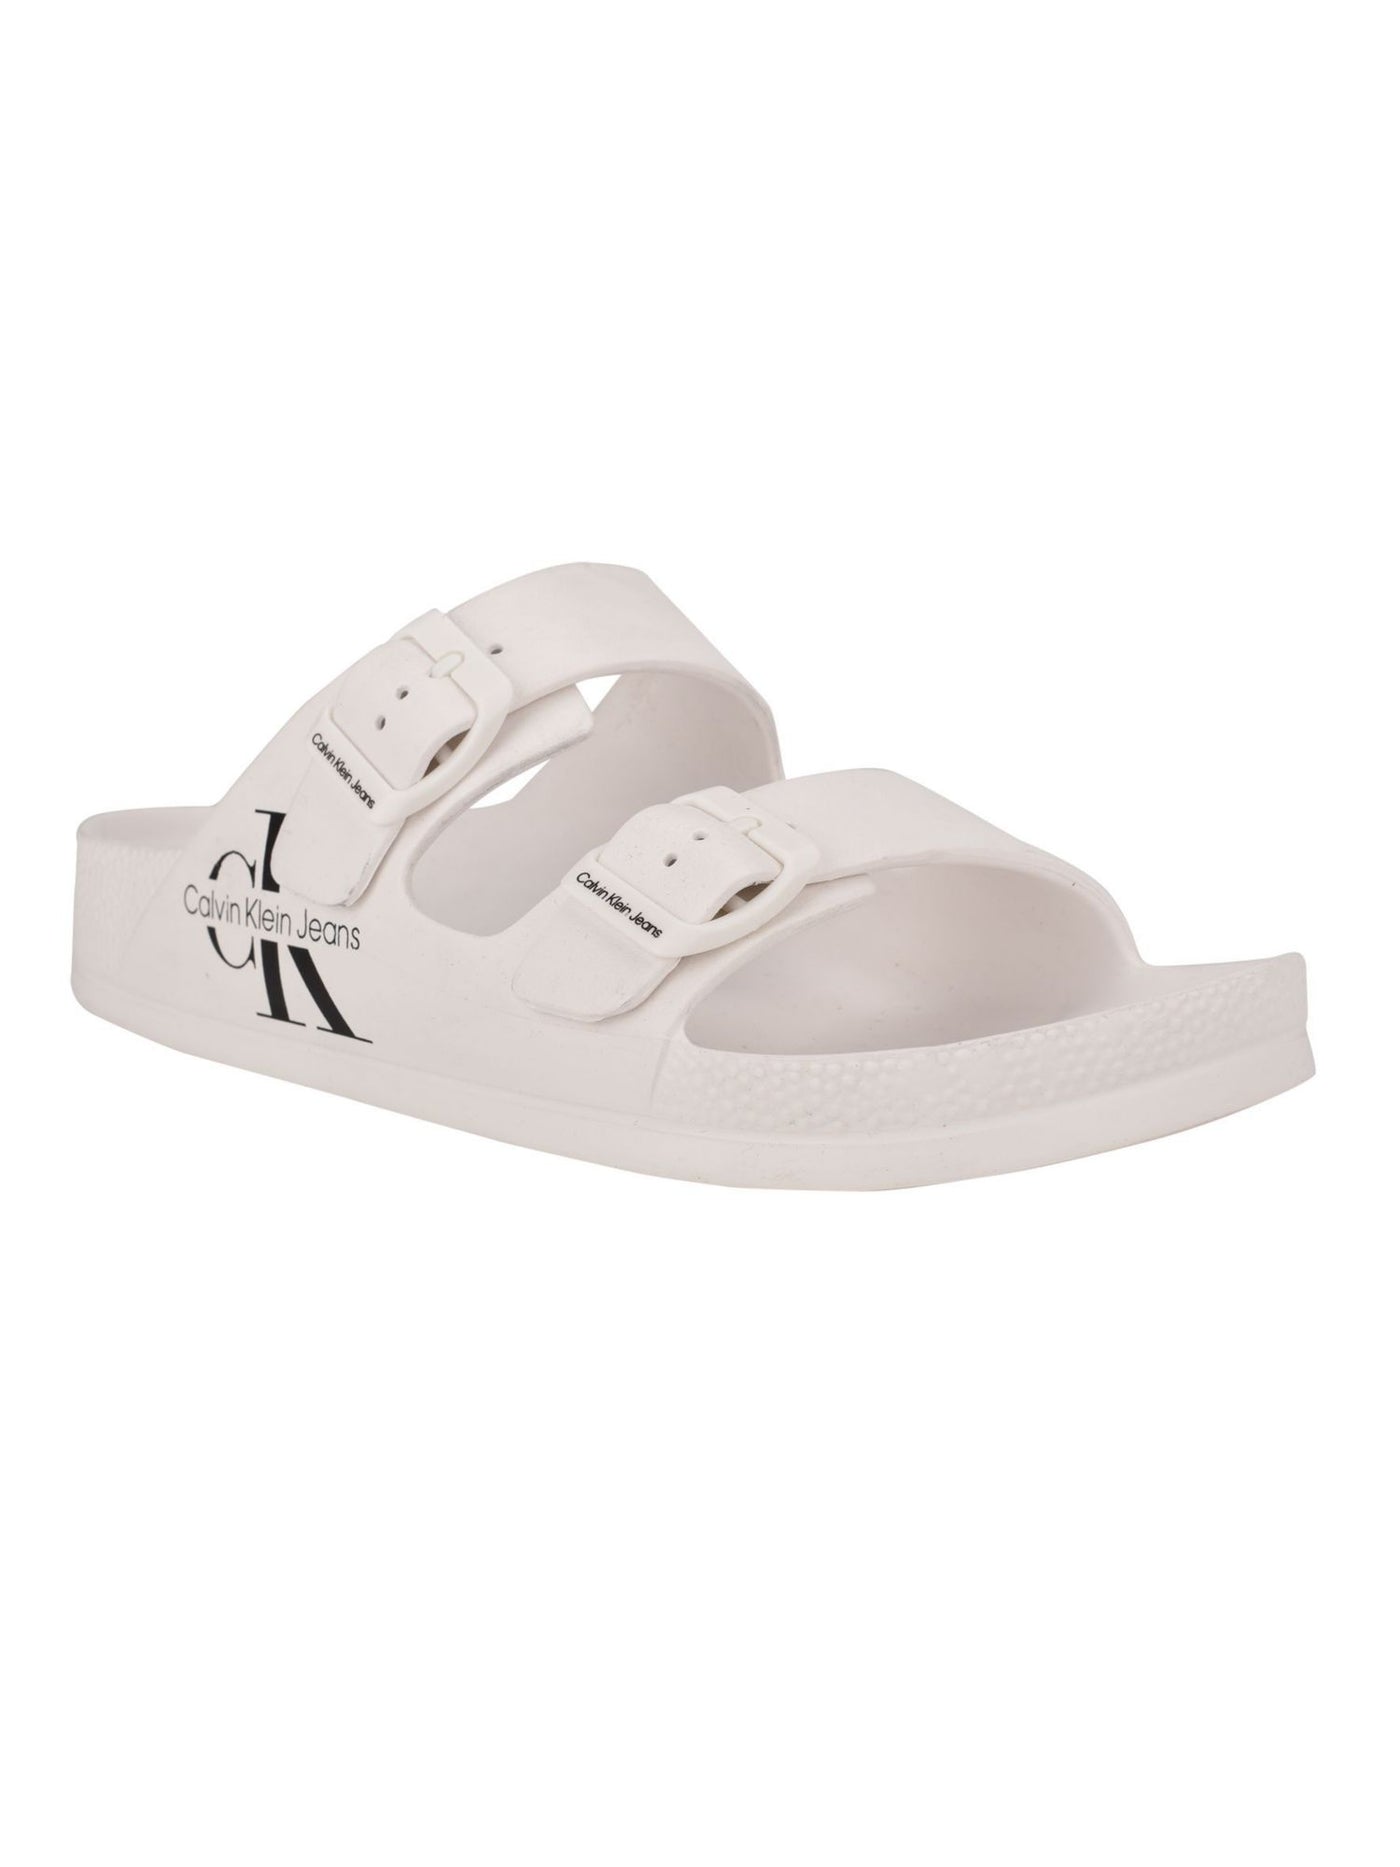 CALVIN KLEIN JEANS Mens White Padded Zion Round Toe Buckle Sandals Shoes 12 M